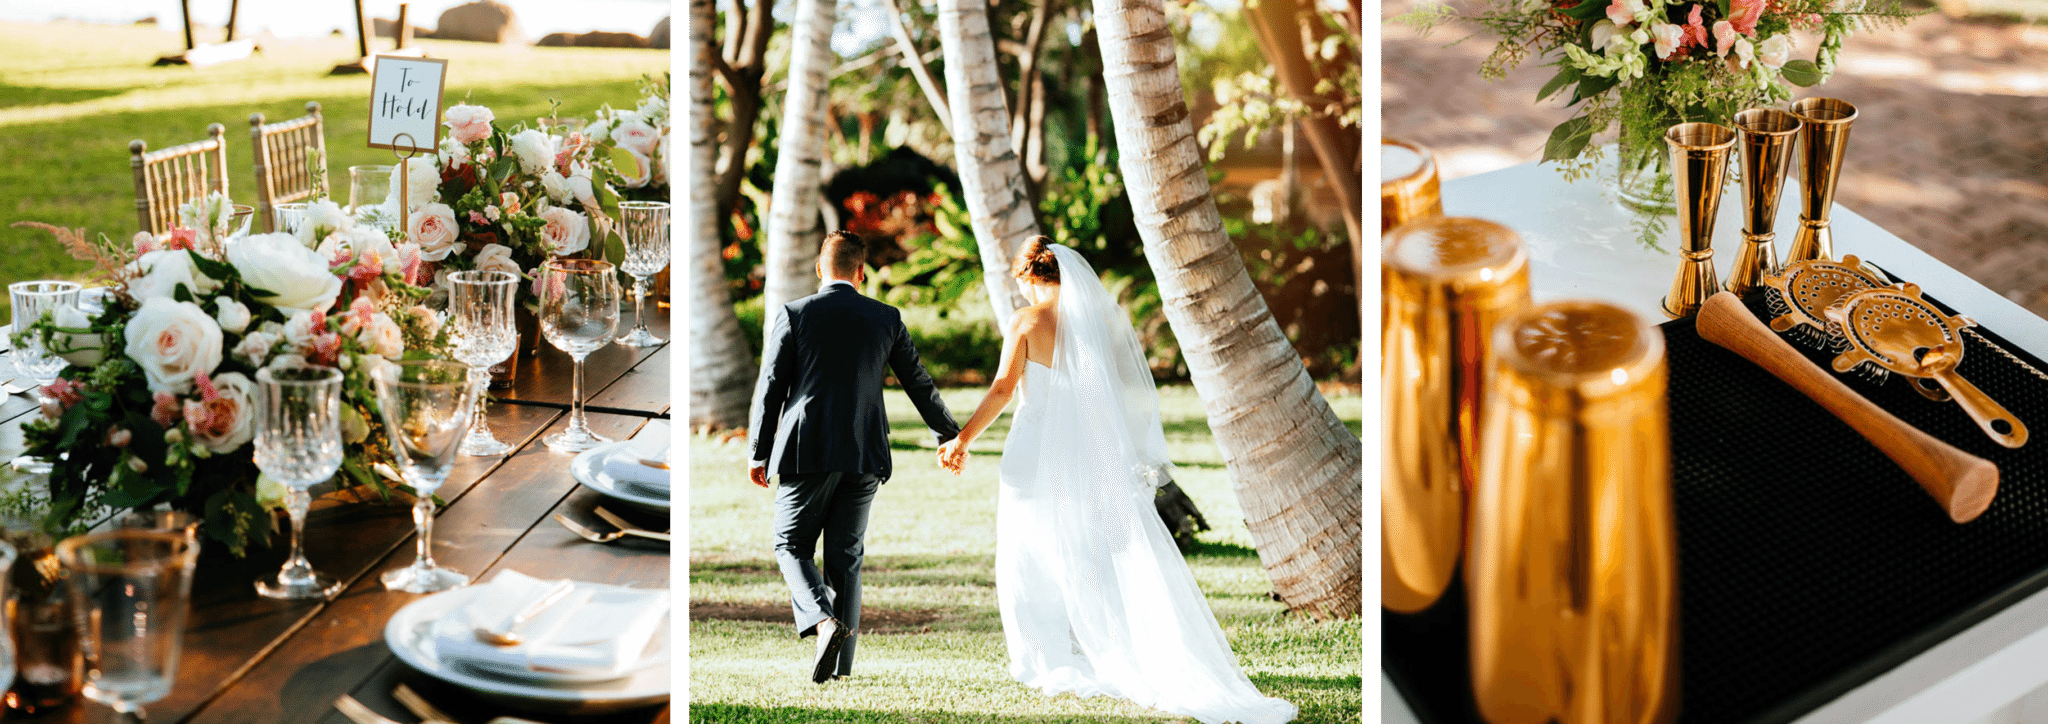 Maui’s Angels Destination Weddings and Events 